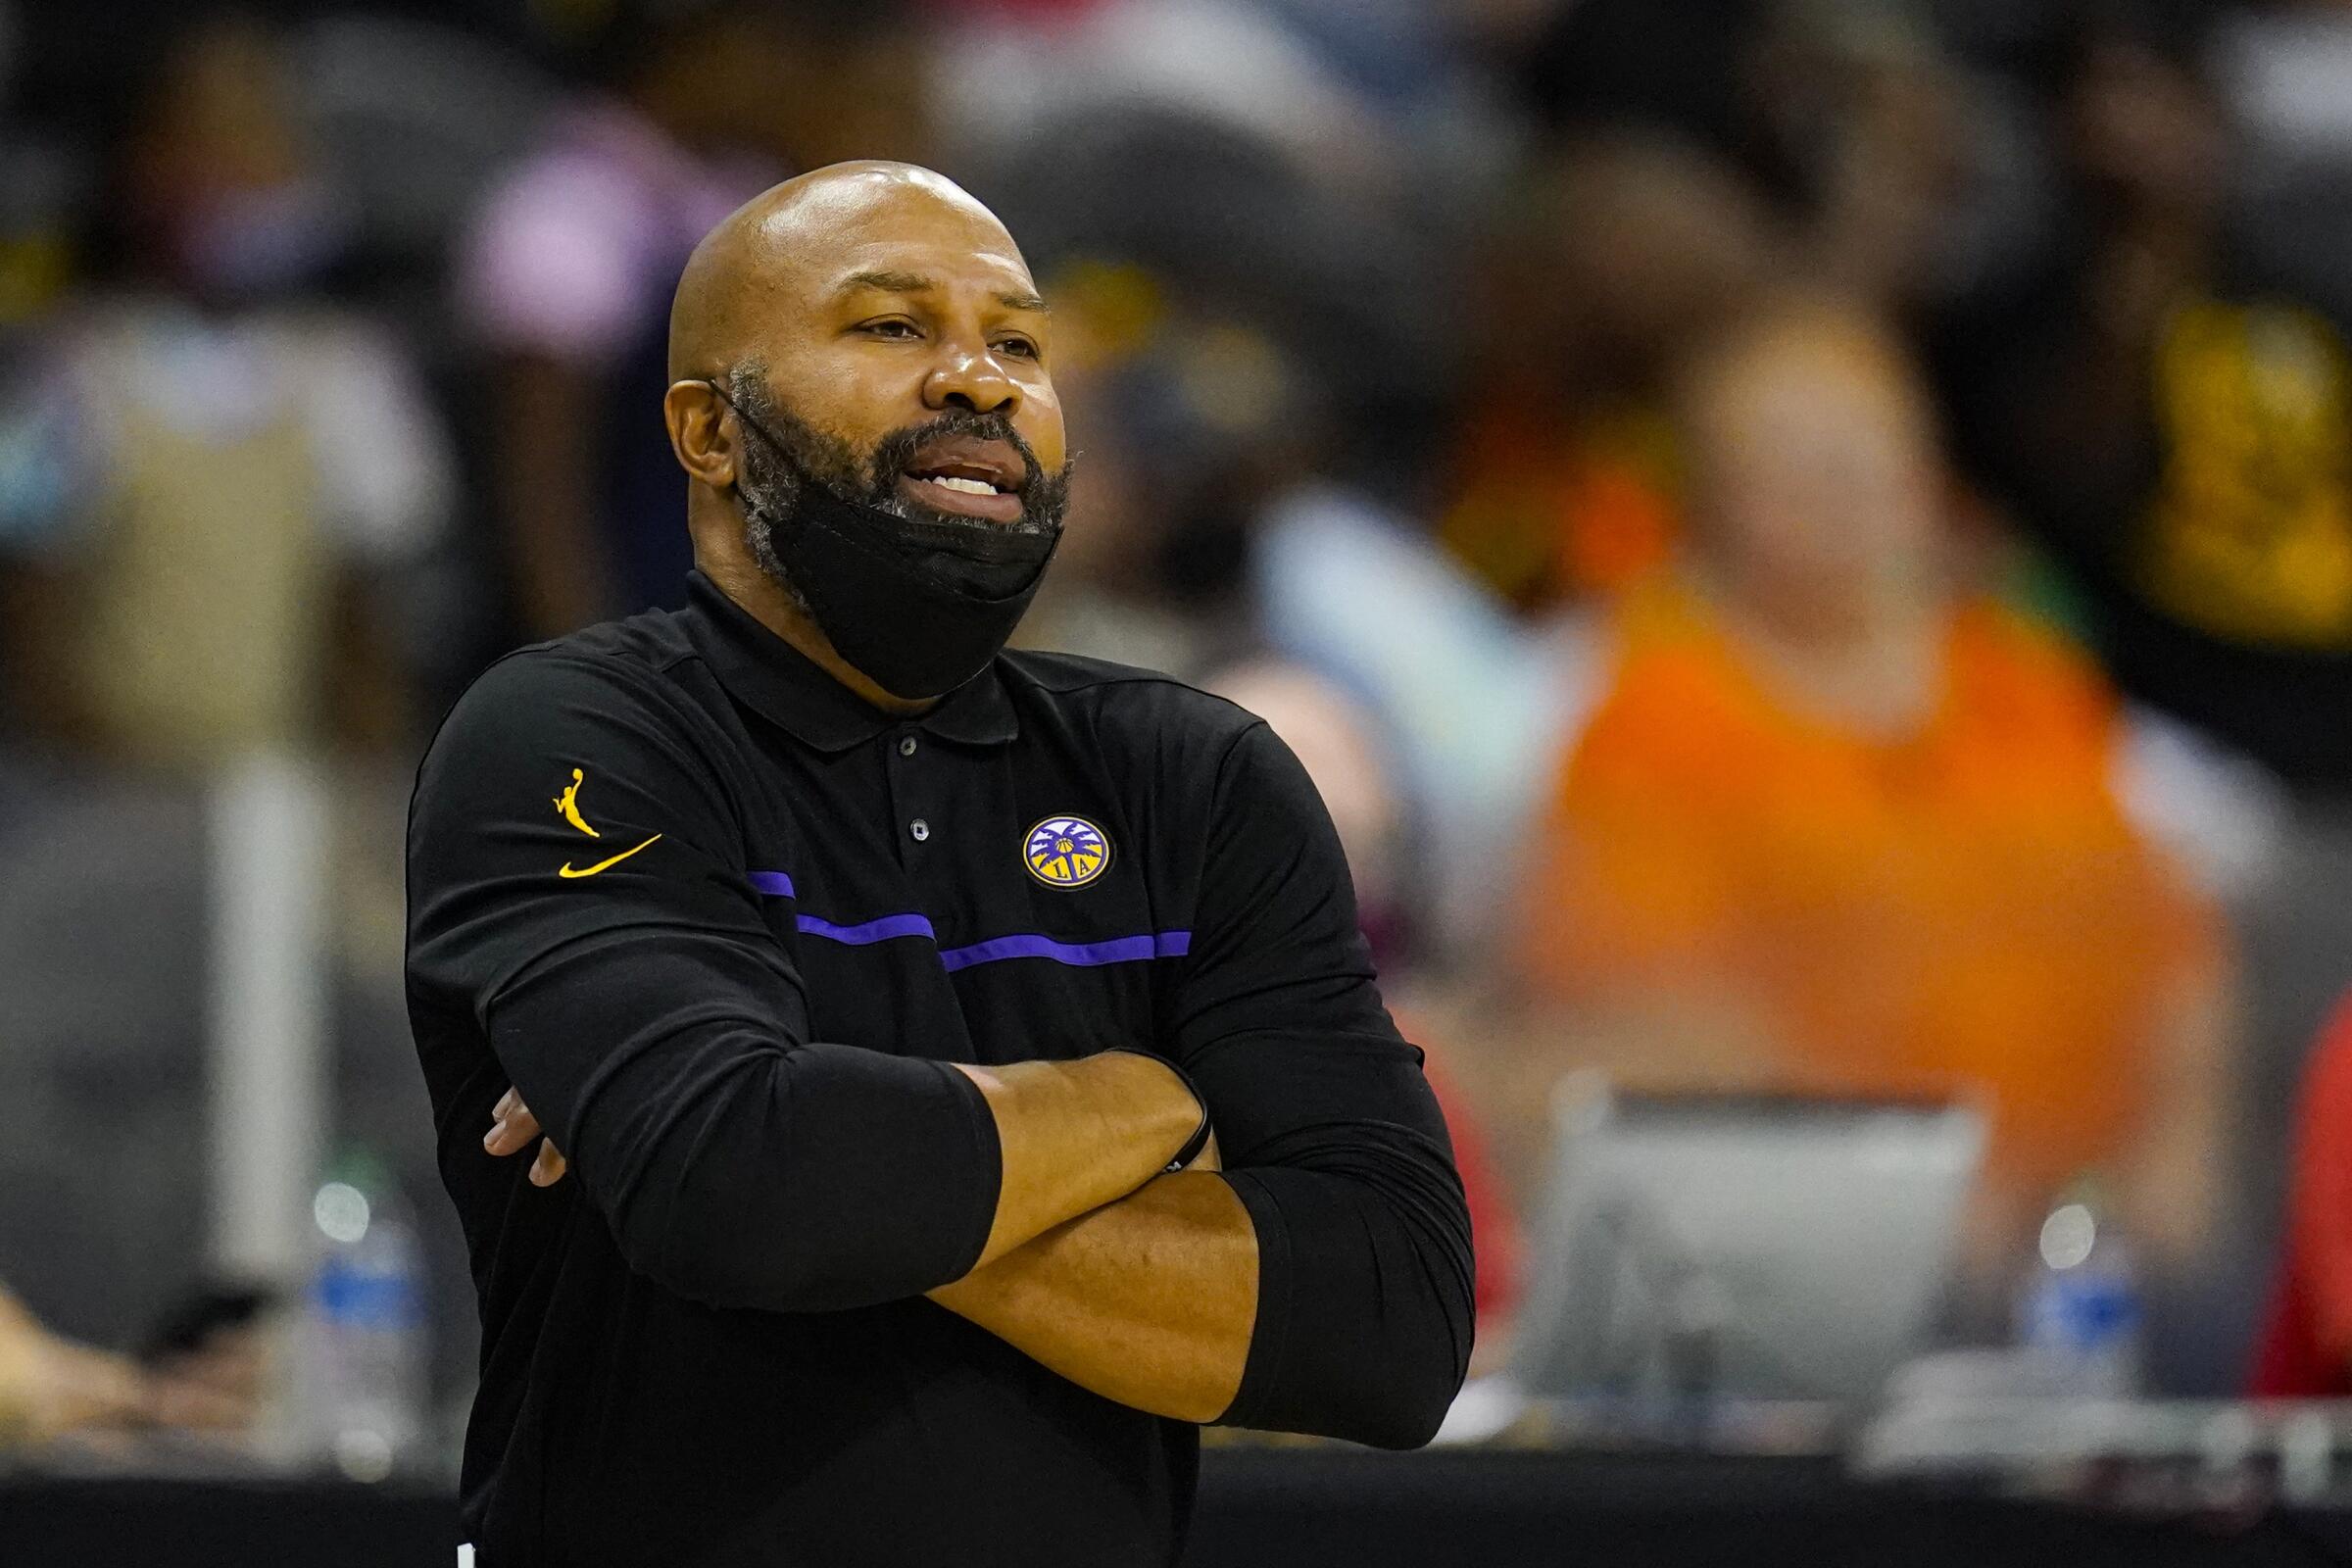 Coach Derek Fisher has his arms folded across his chest as we watches the Sparks play.